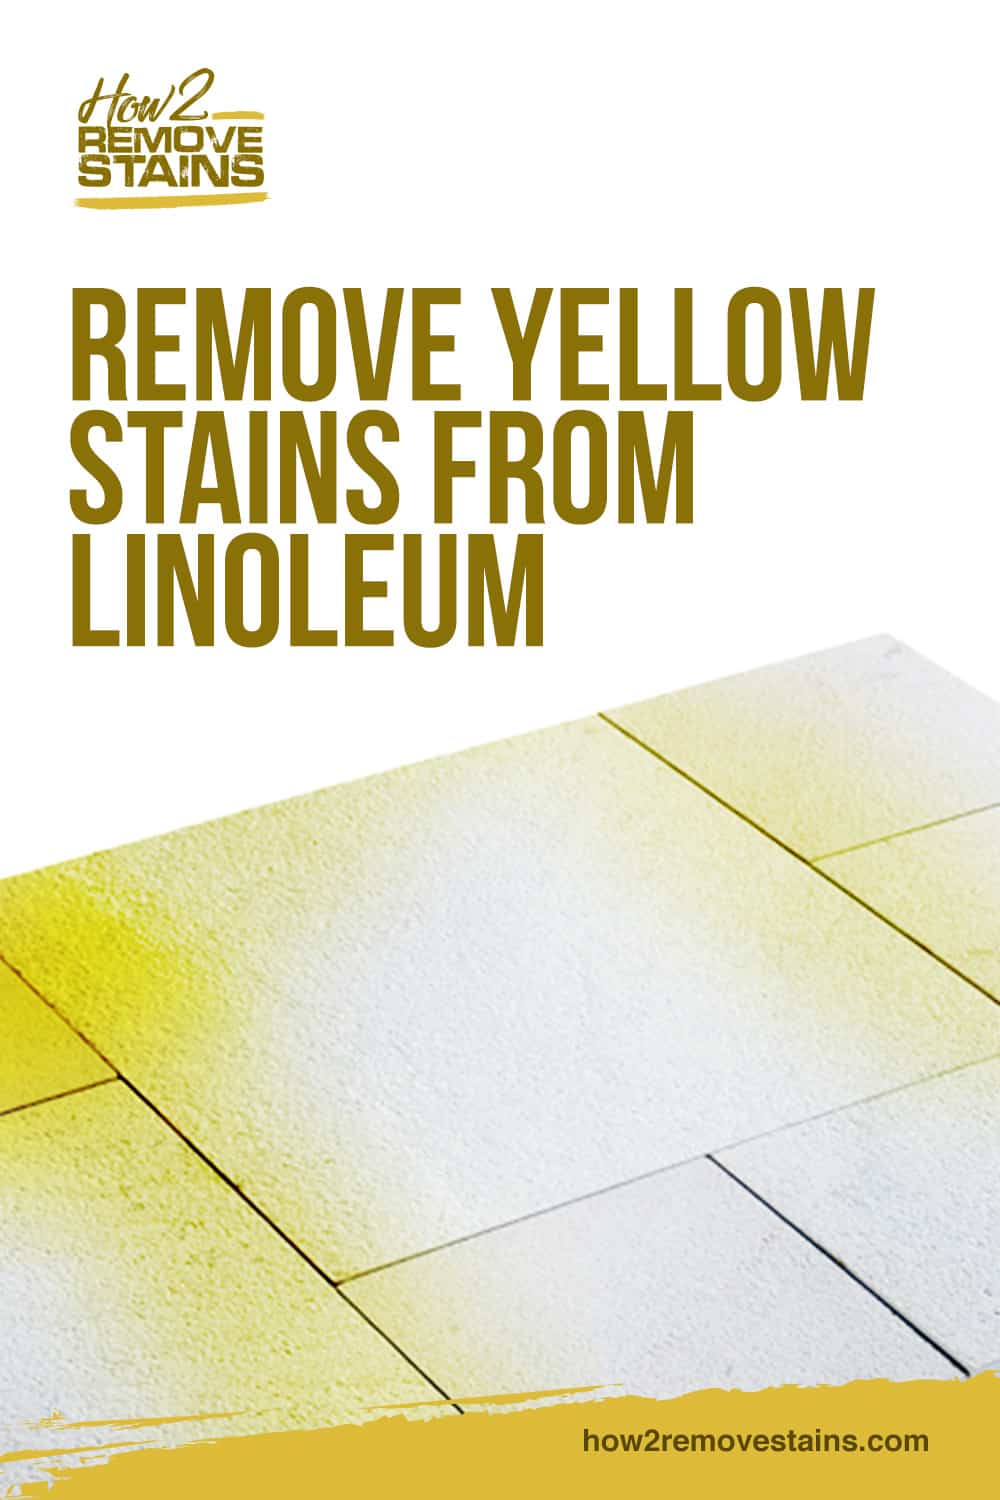 Remove Yellow Stains From Linoleum, How Do You Fix Yellowing Vinyl Flooring